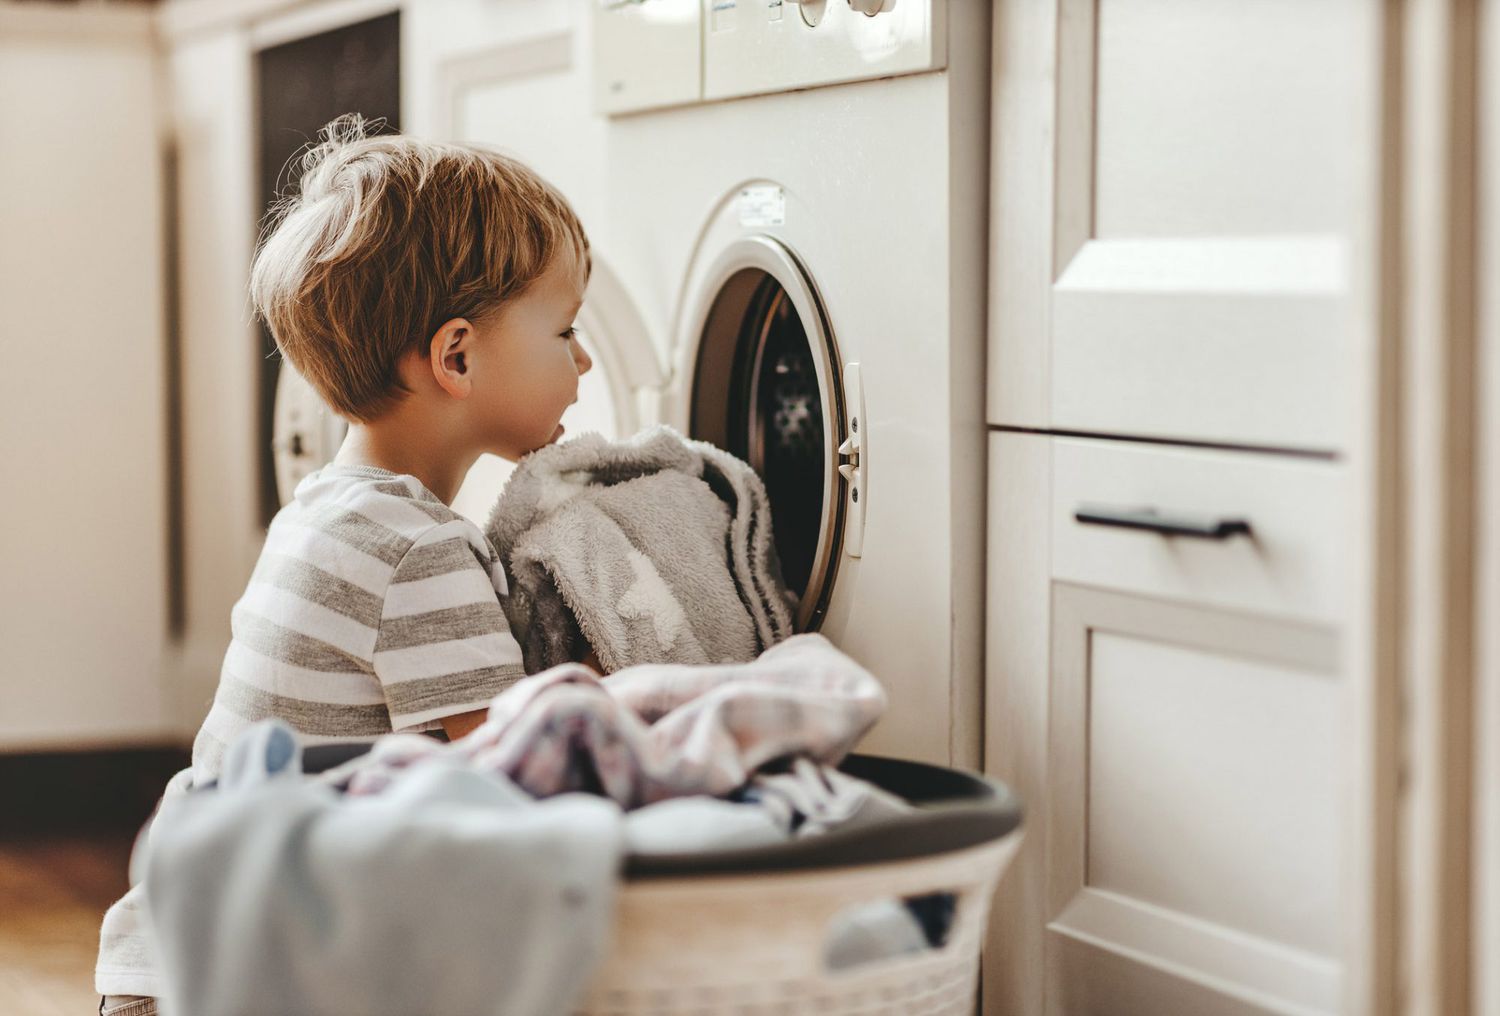 An image of a young boy doing laundry.